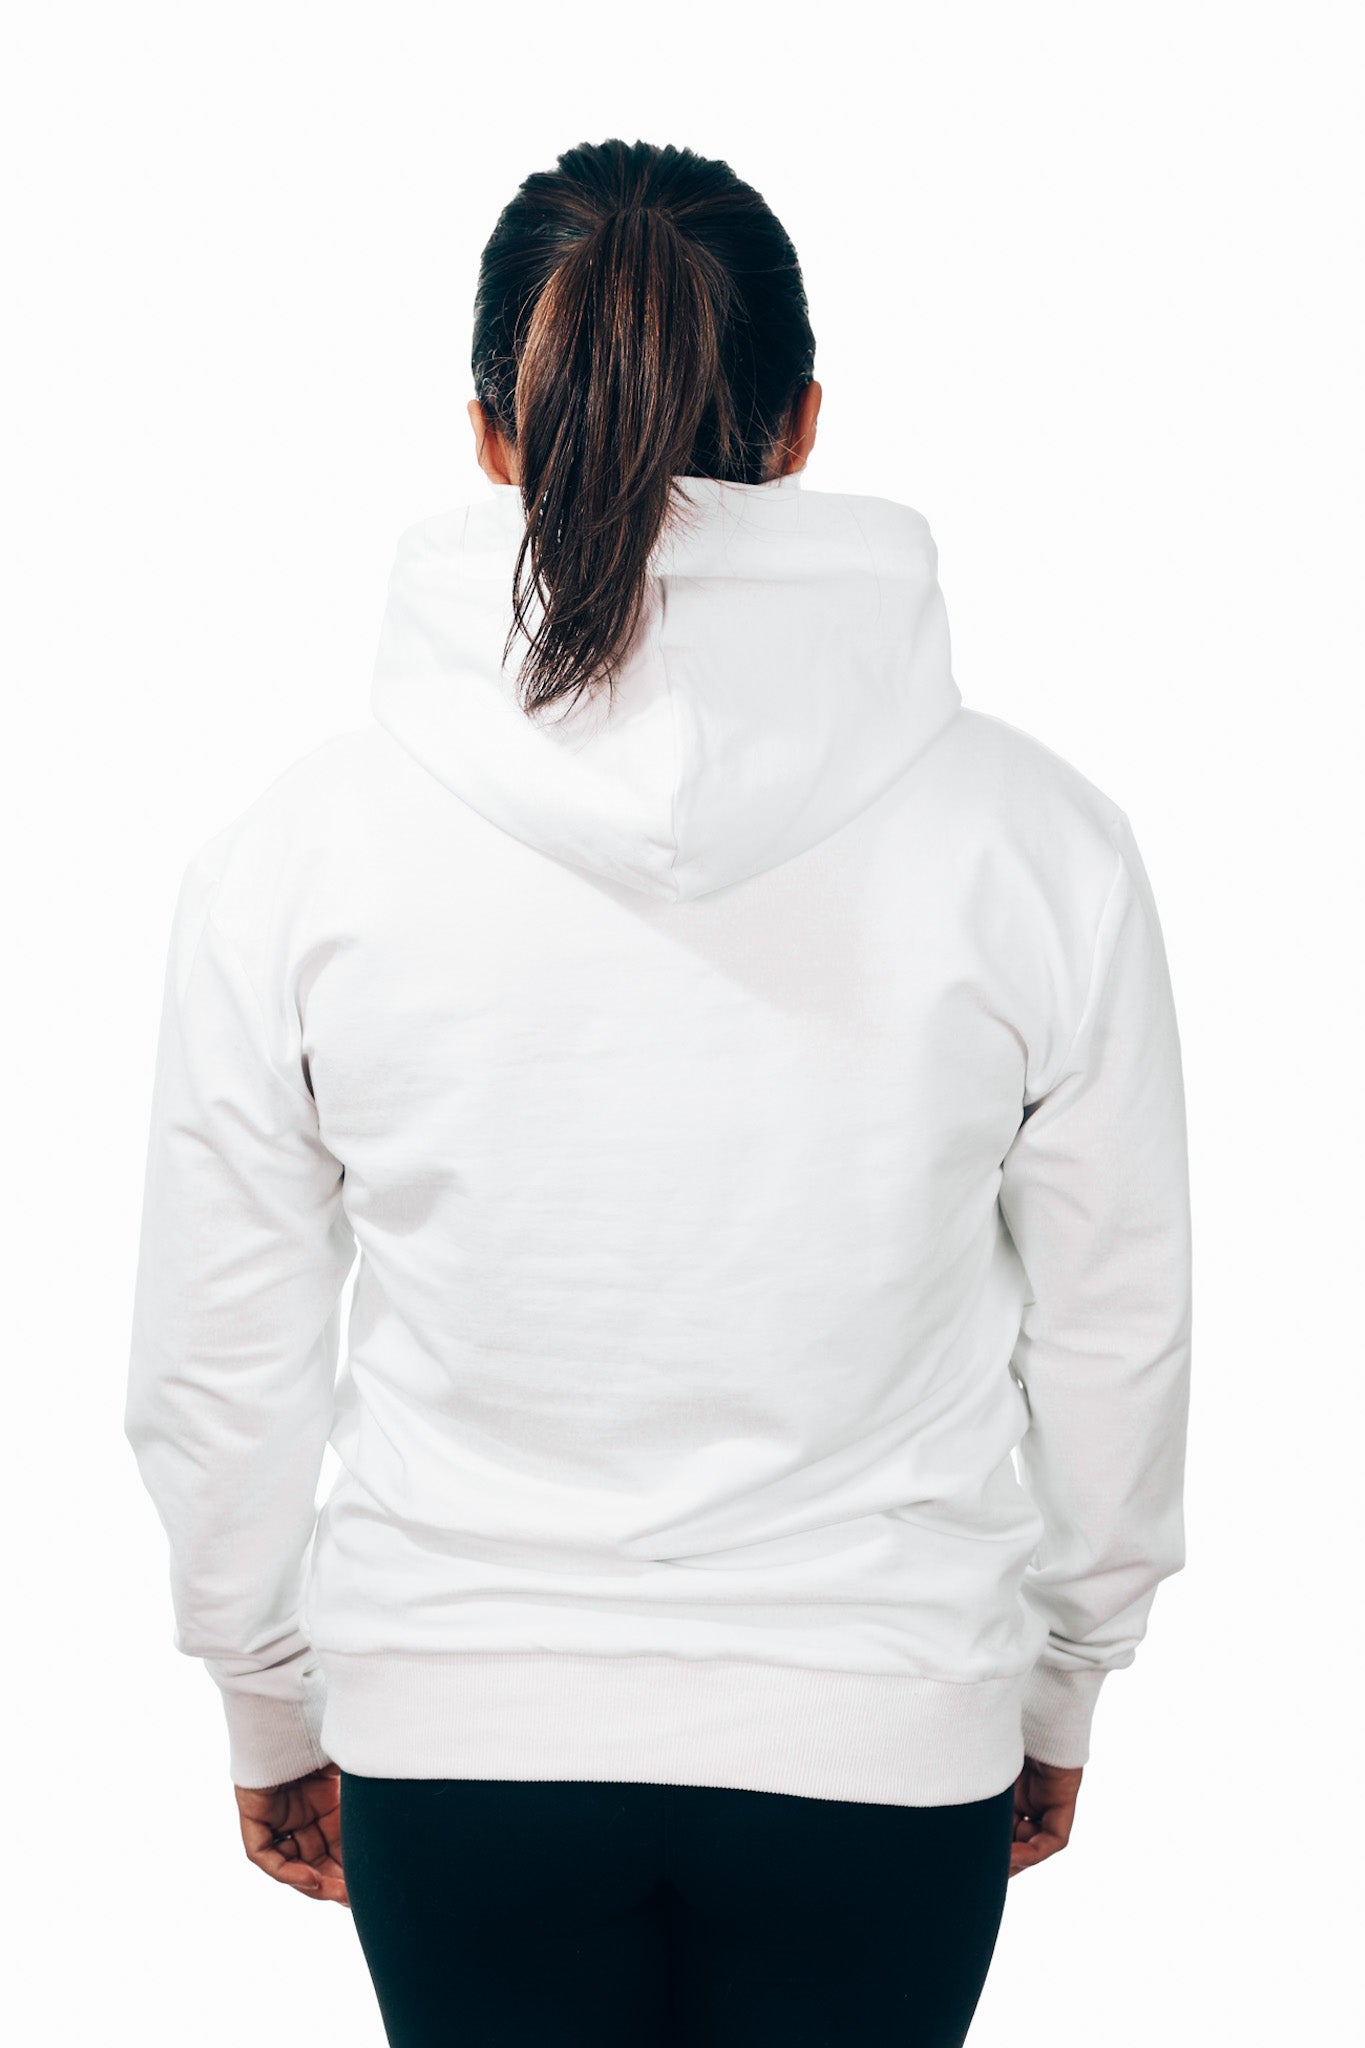 A rear view shot of a woman wearing the white face mask hoodie by MFKN Hustle.